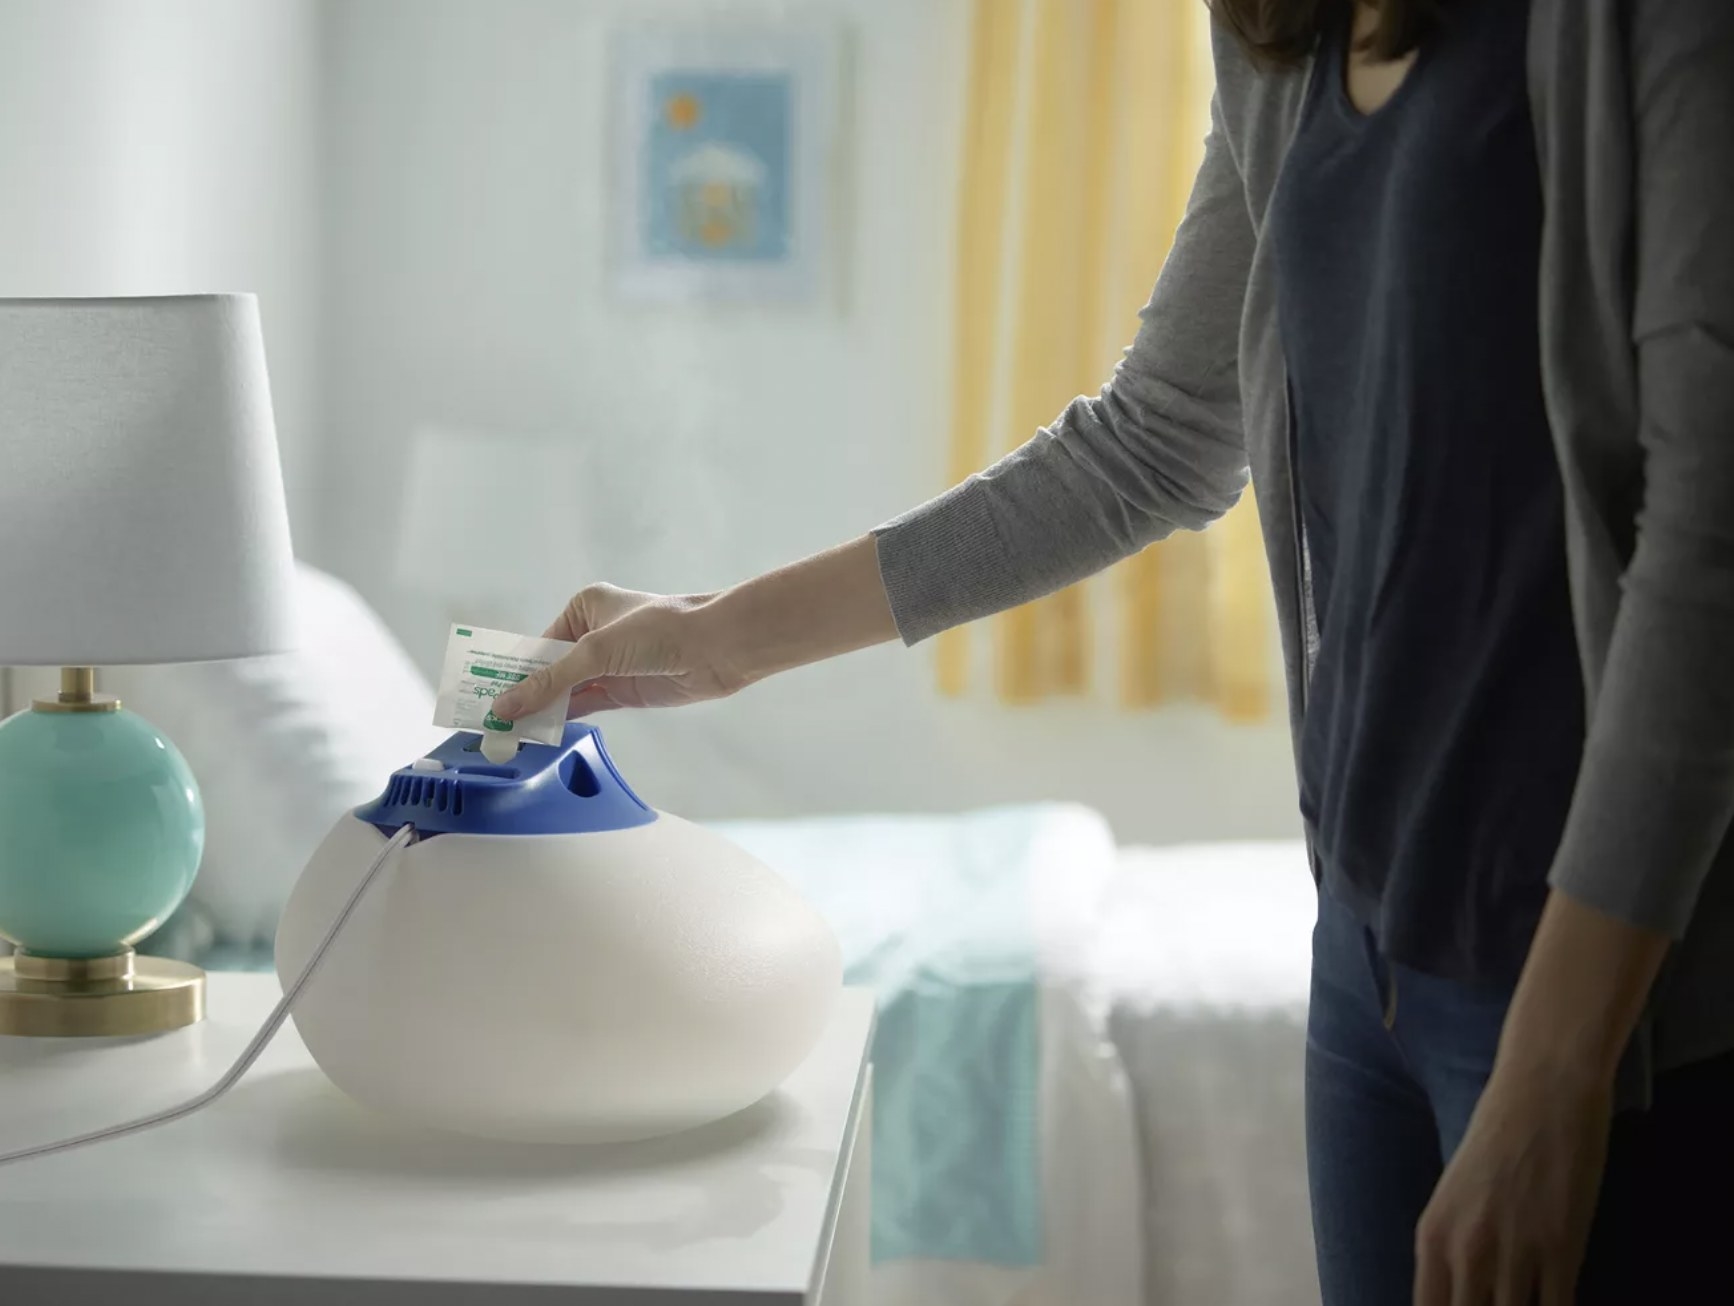 A model using the humidifier